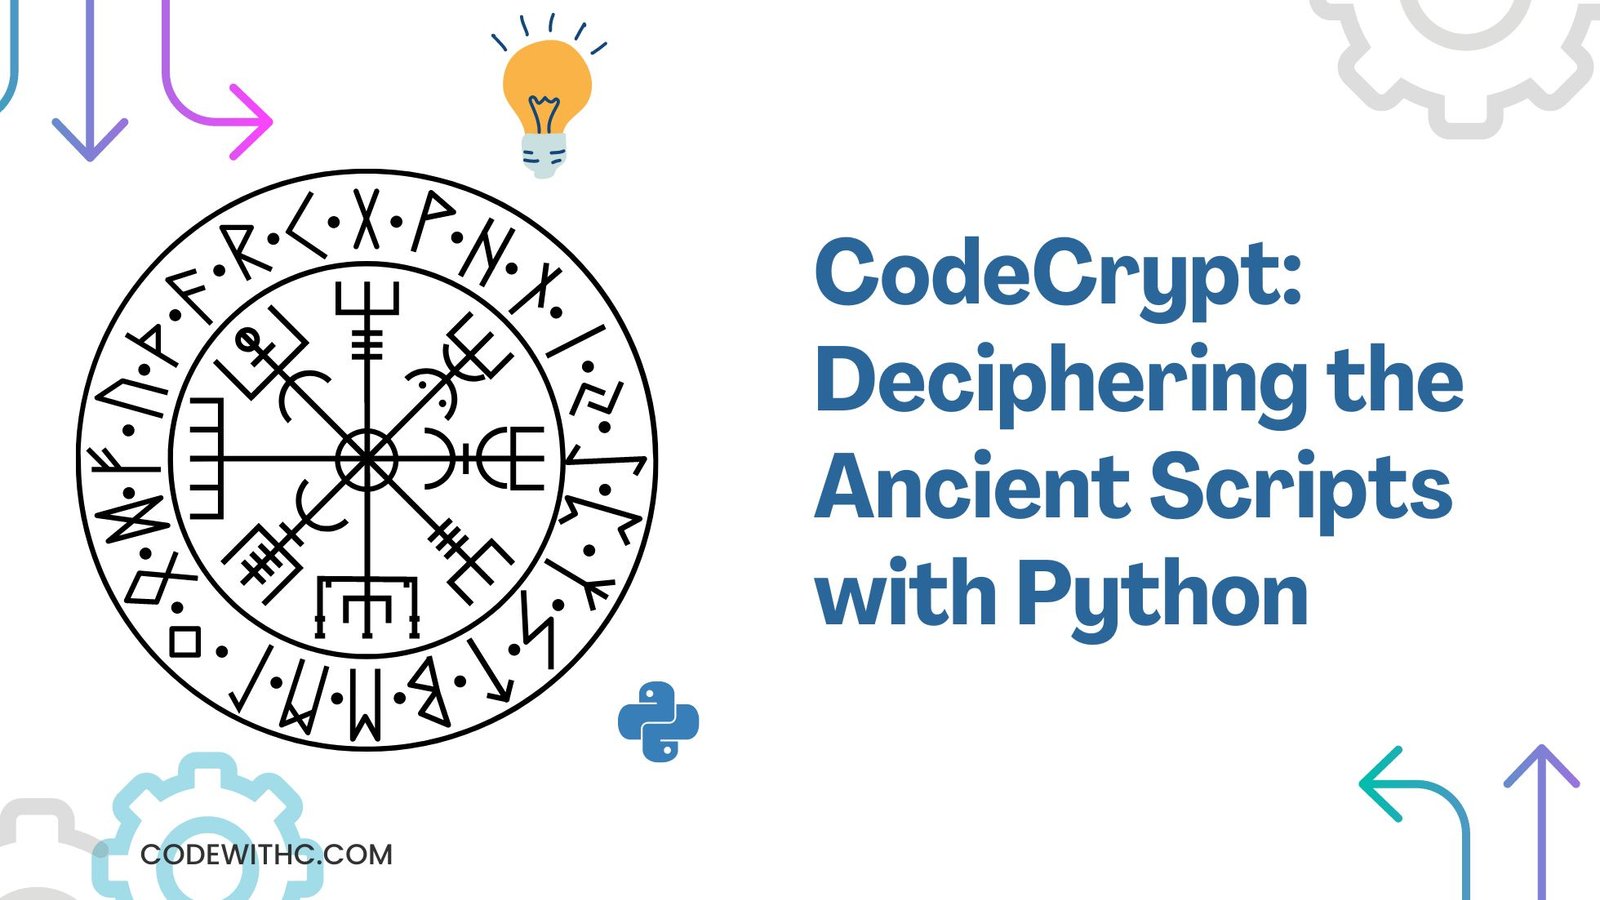 CodeCrypt: Deciphering the Ancient Scripts with Python